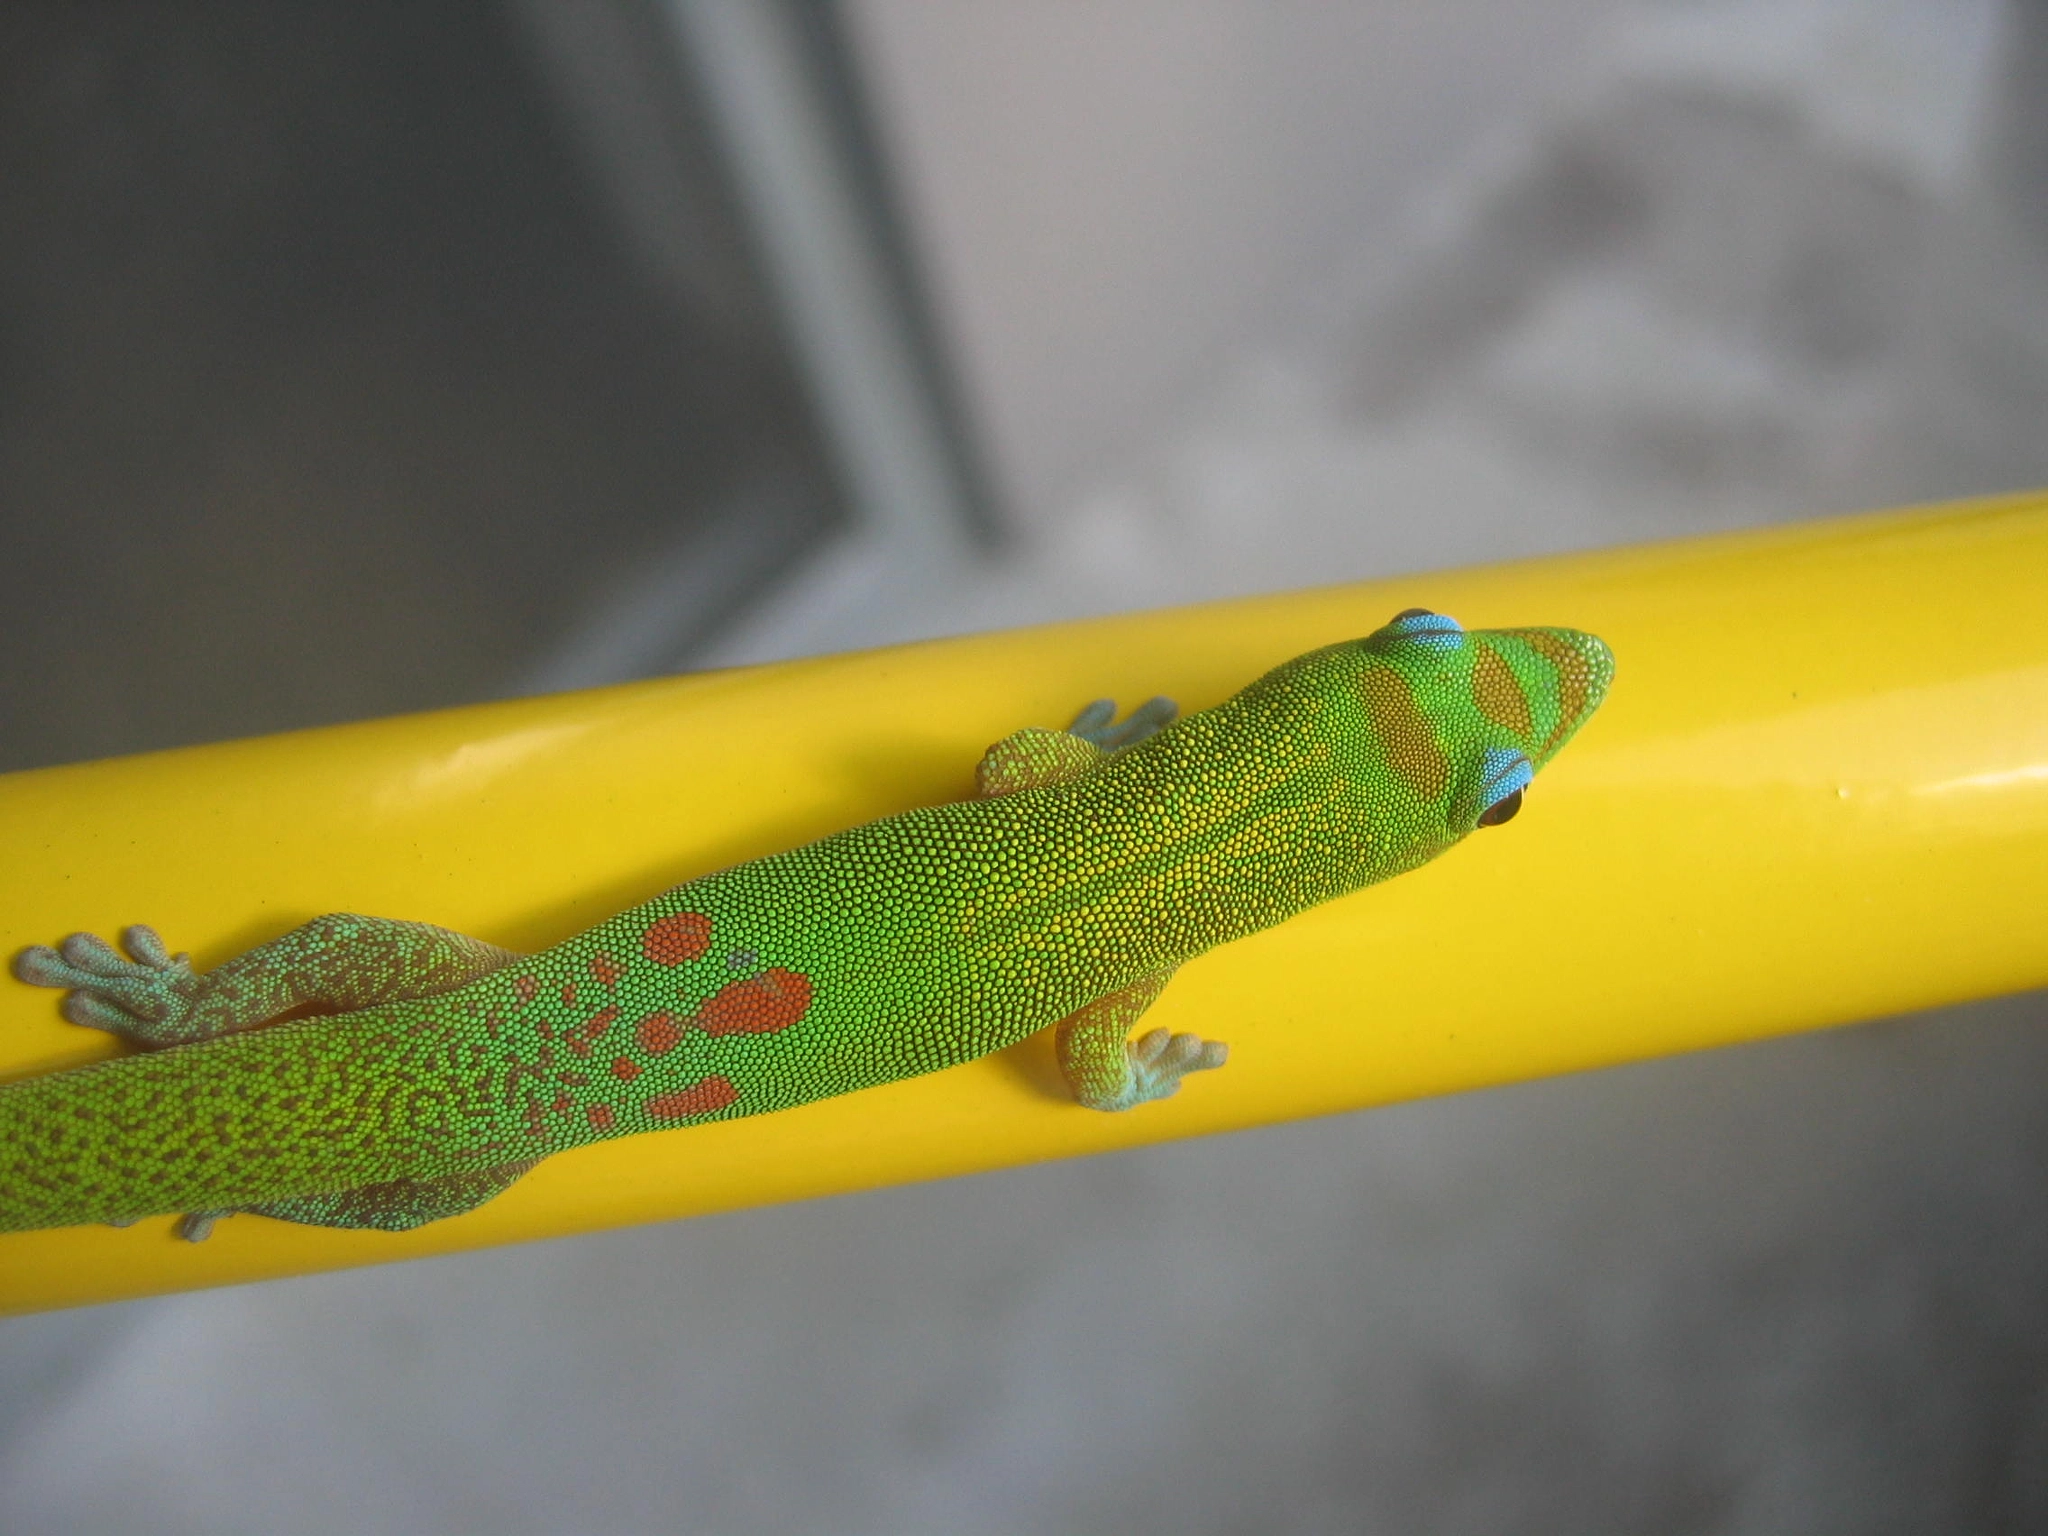 Canon POWERSHOT S400 sample photo. Gold dust day gecko photography